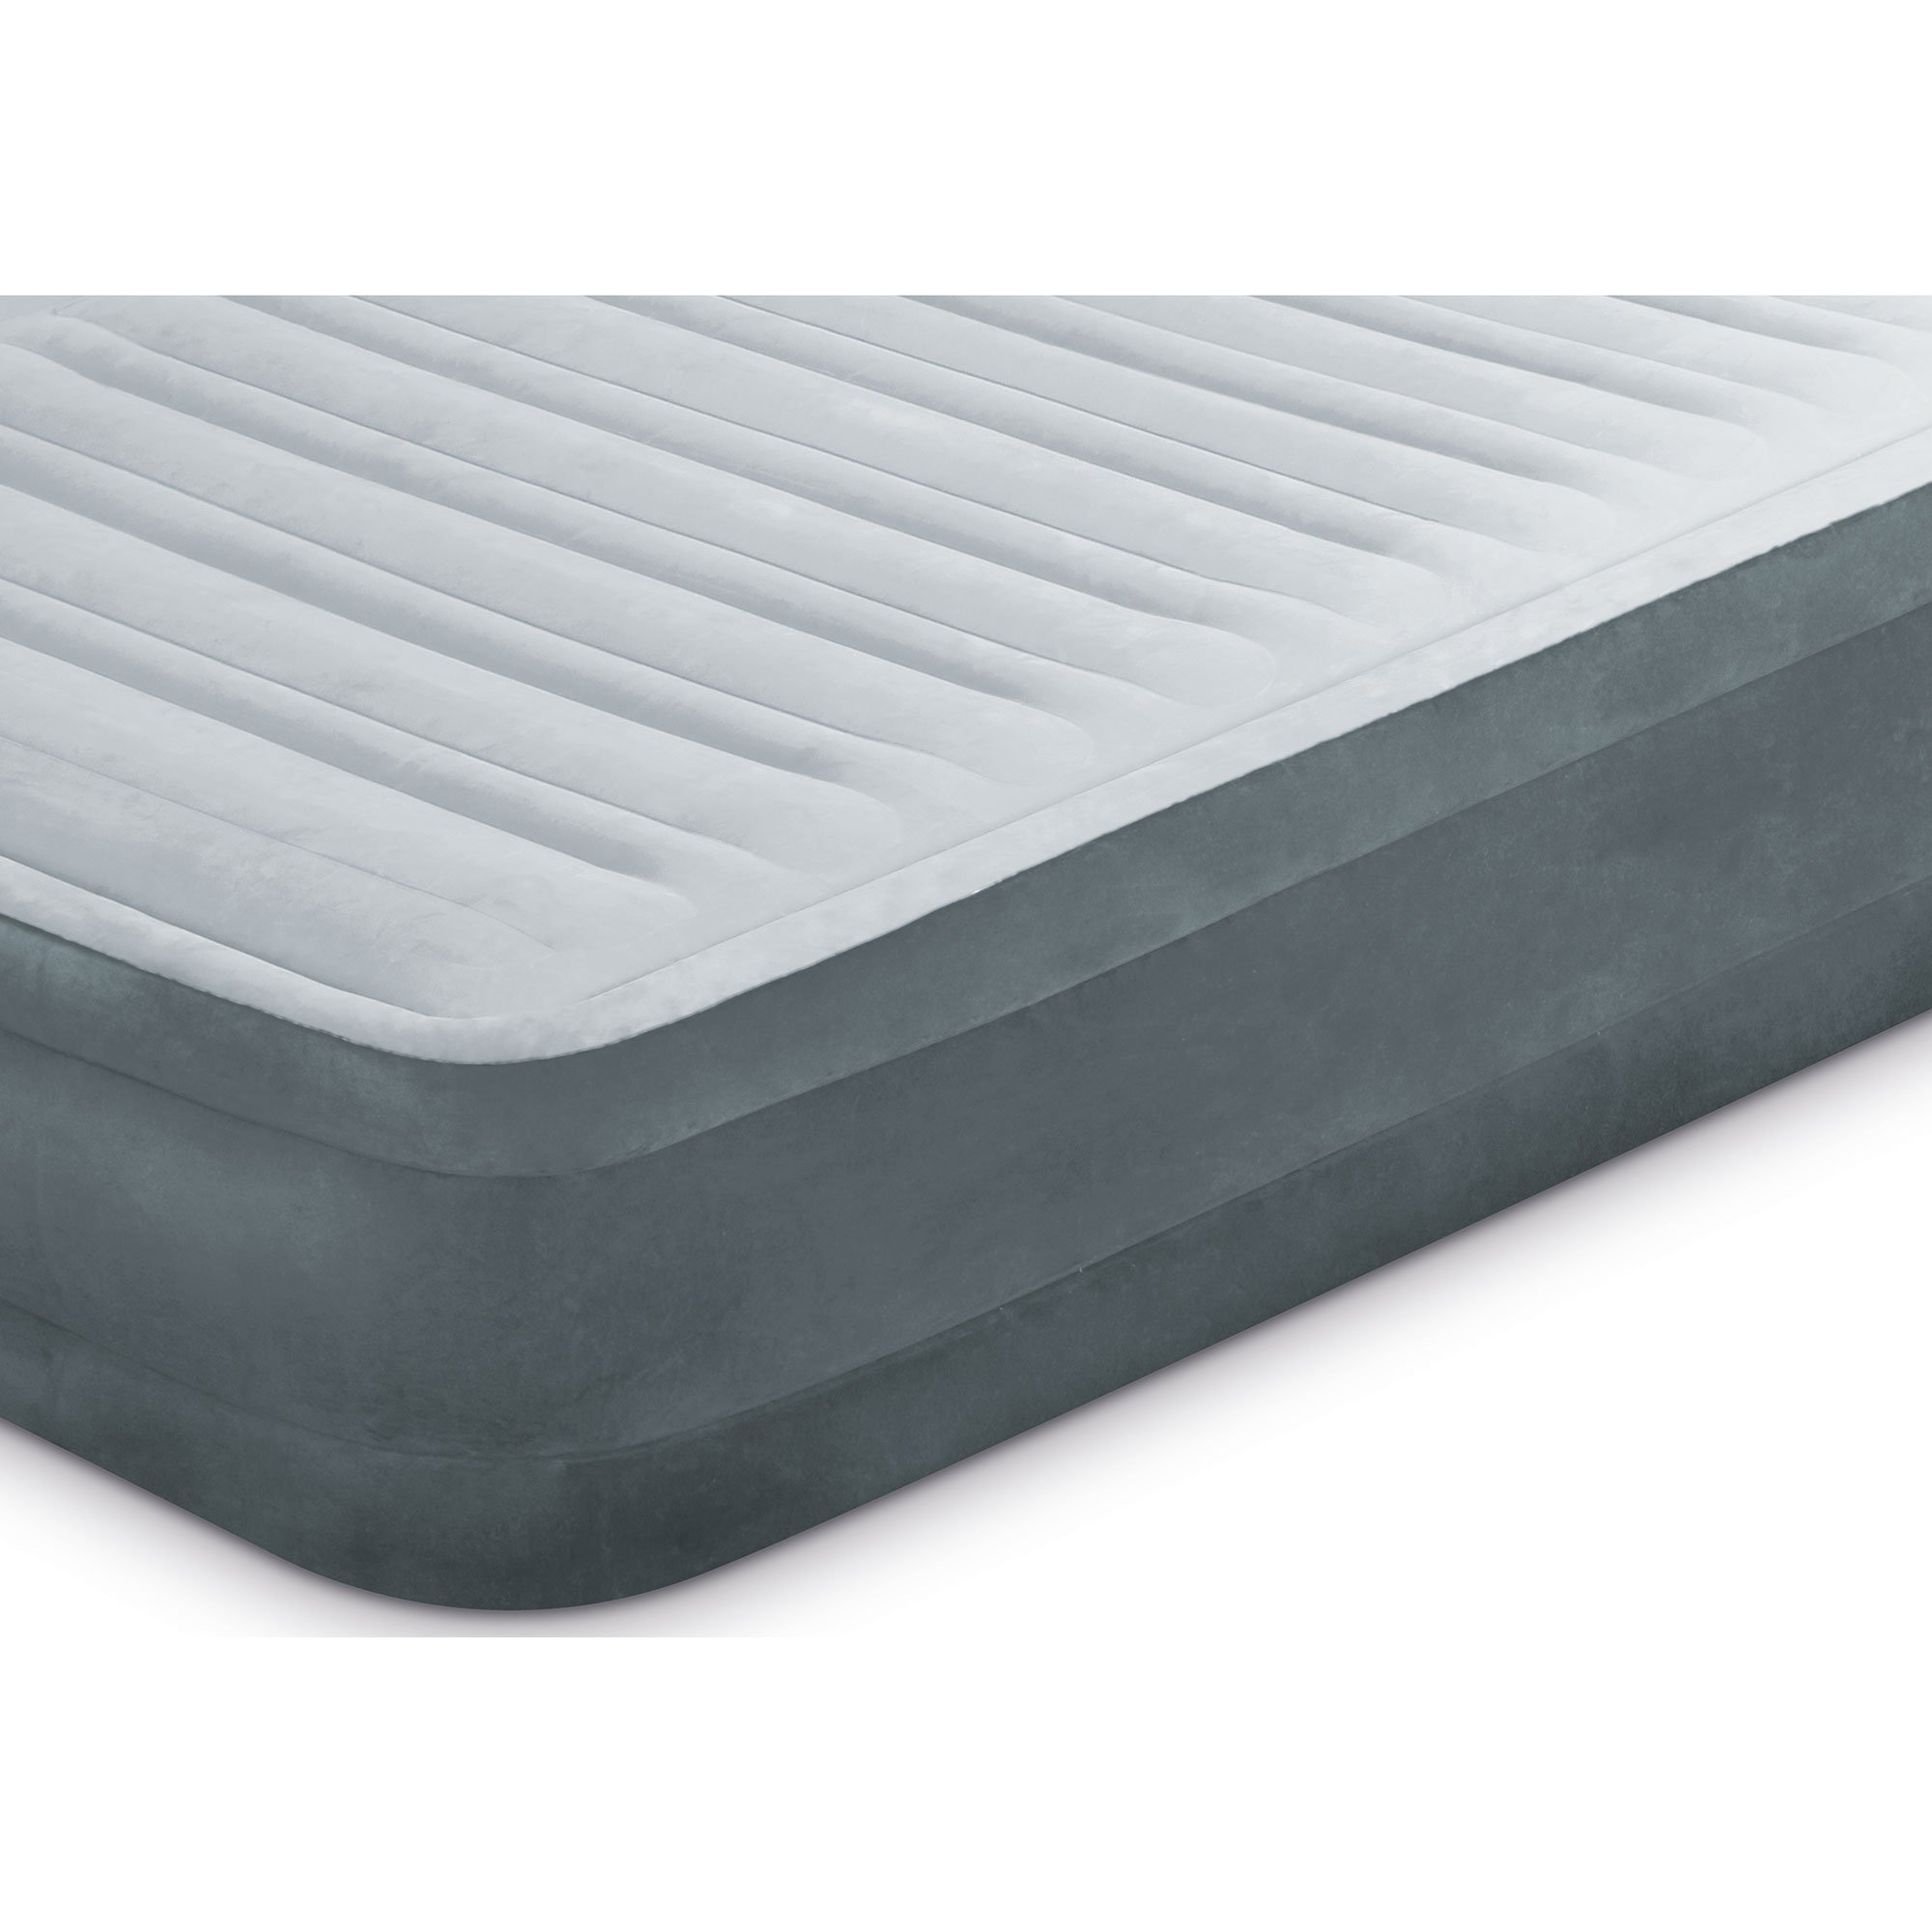 Intex Twin 13" Intex Dura Beam Plus Series Mid Rise Airbed Mattress with Built In Electric Pump - image 3 of 9